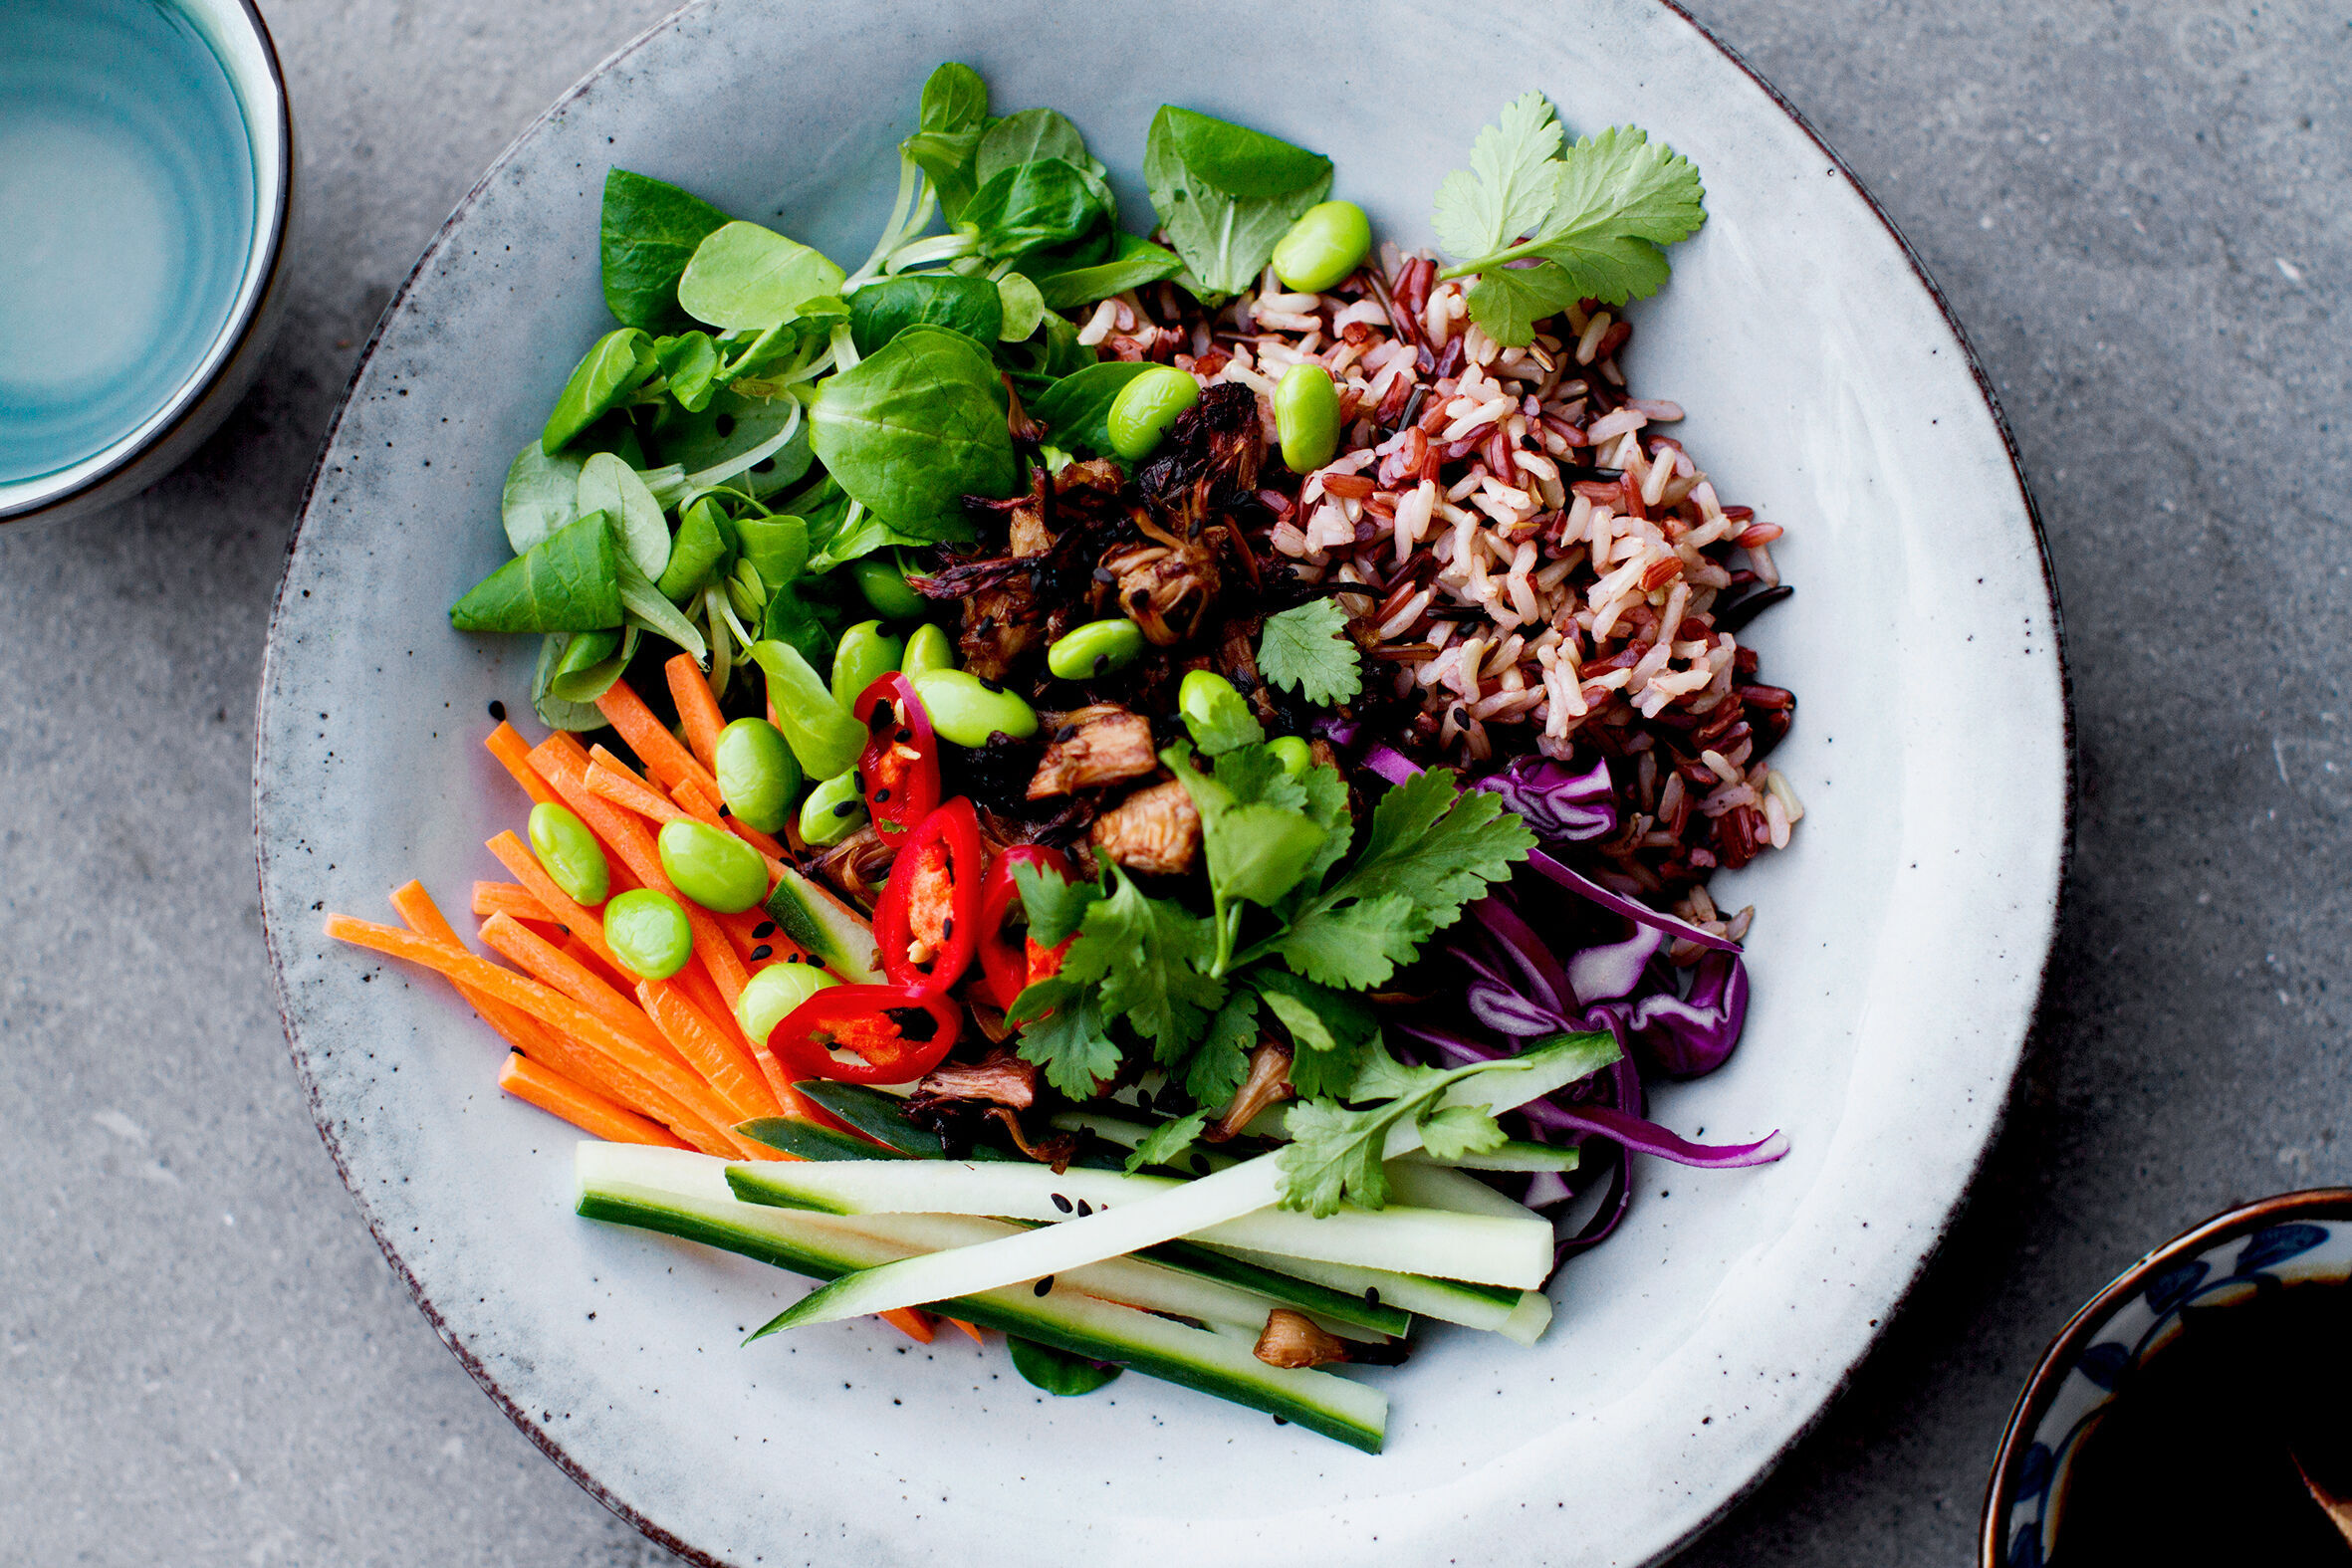 Energise yourself after yoga with these delicious yogi bowls